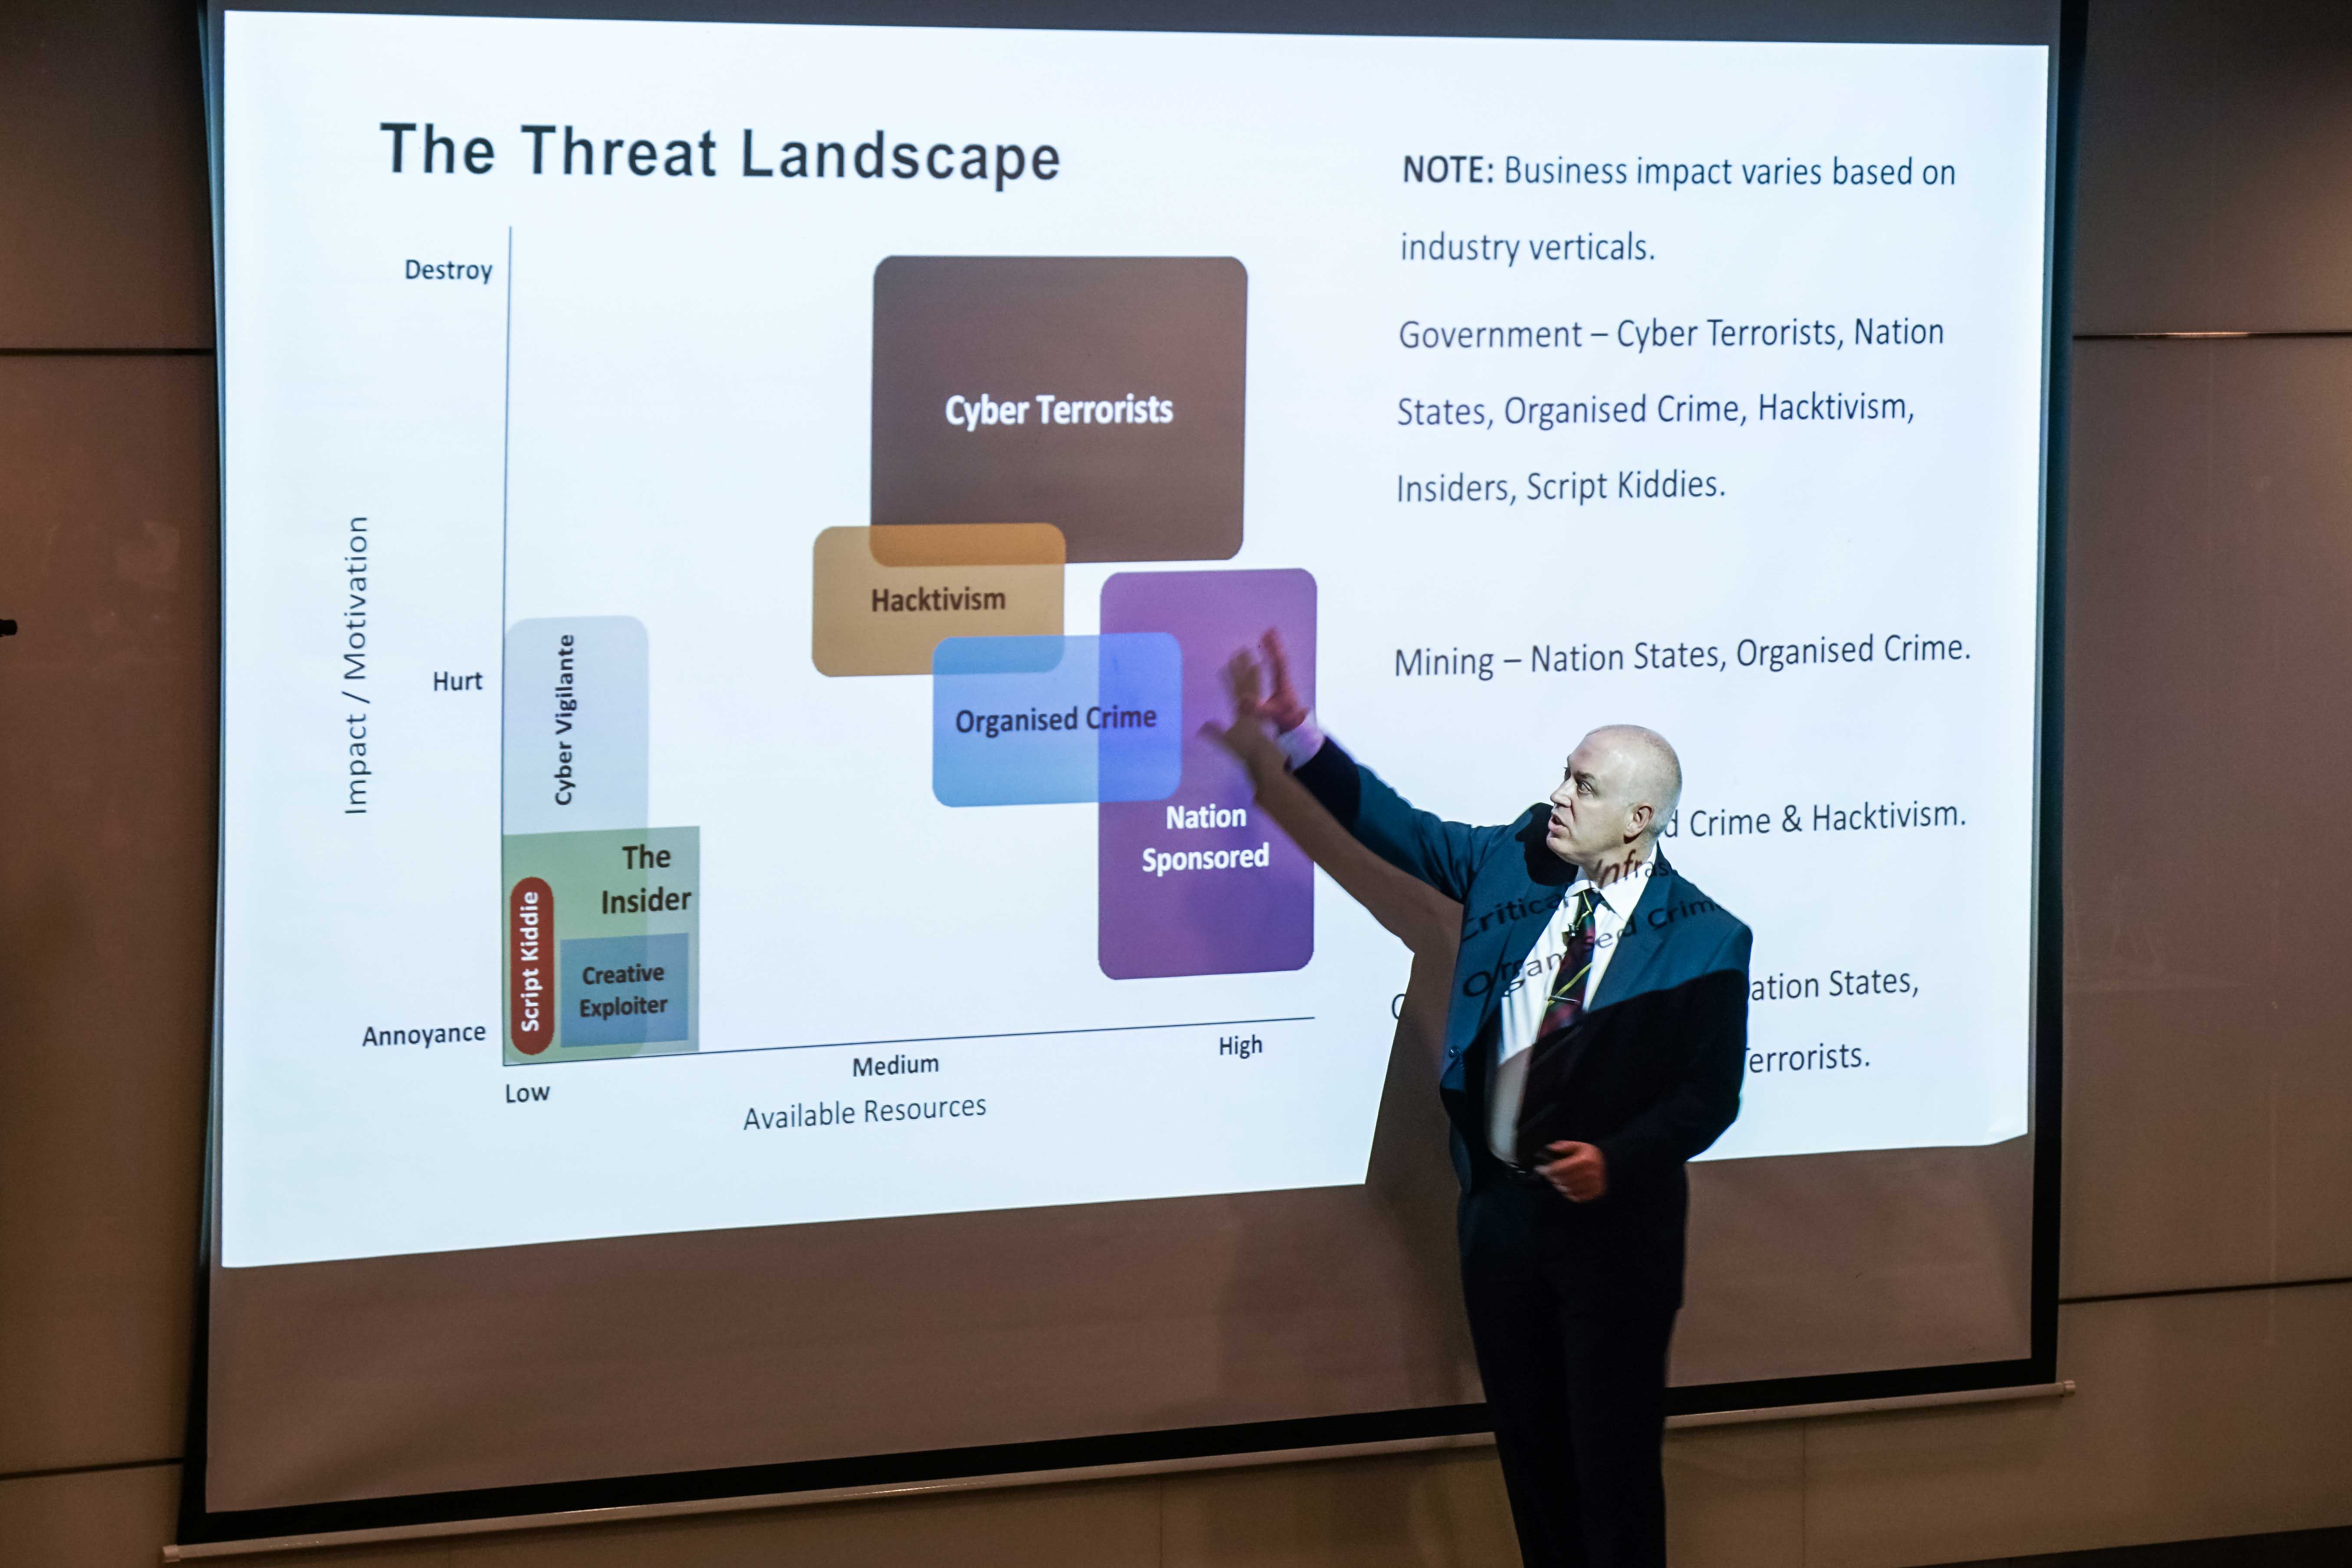 Professor Matthew Warren, keynote speaker at the event, showed the audience the complexity of the current threat landscape.